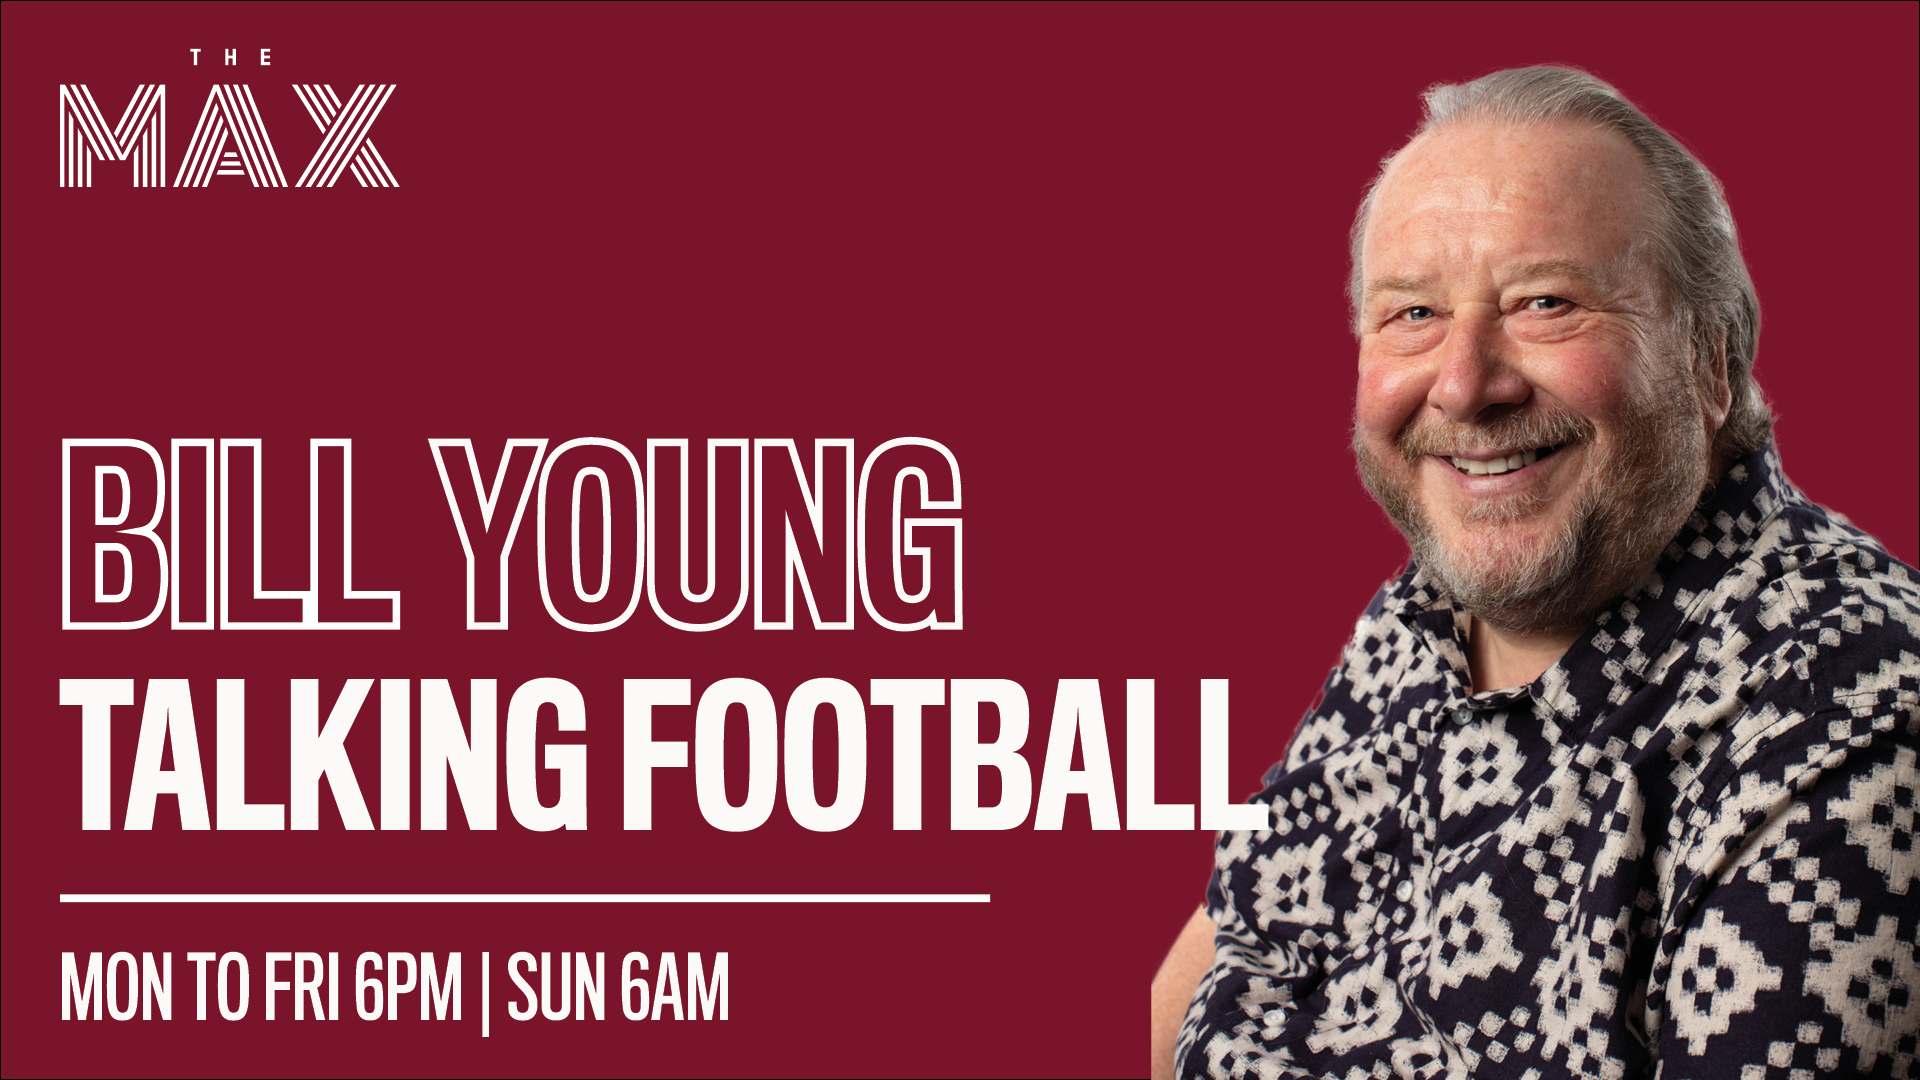 Talking Football with Bill Young - Thursday 28th January